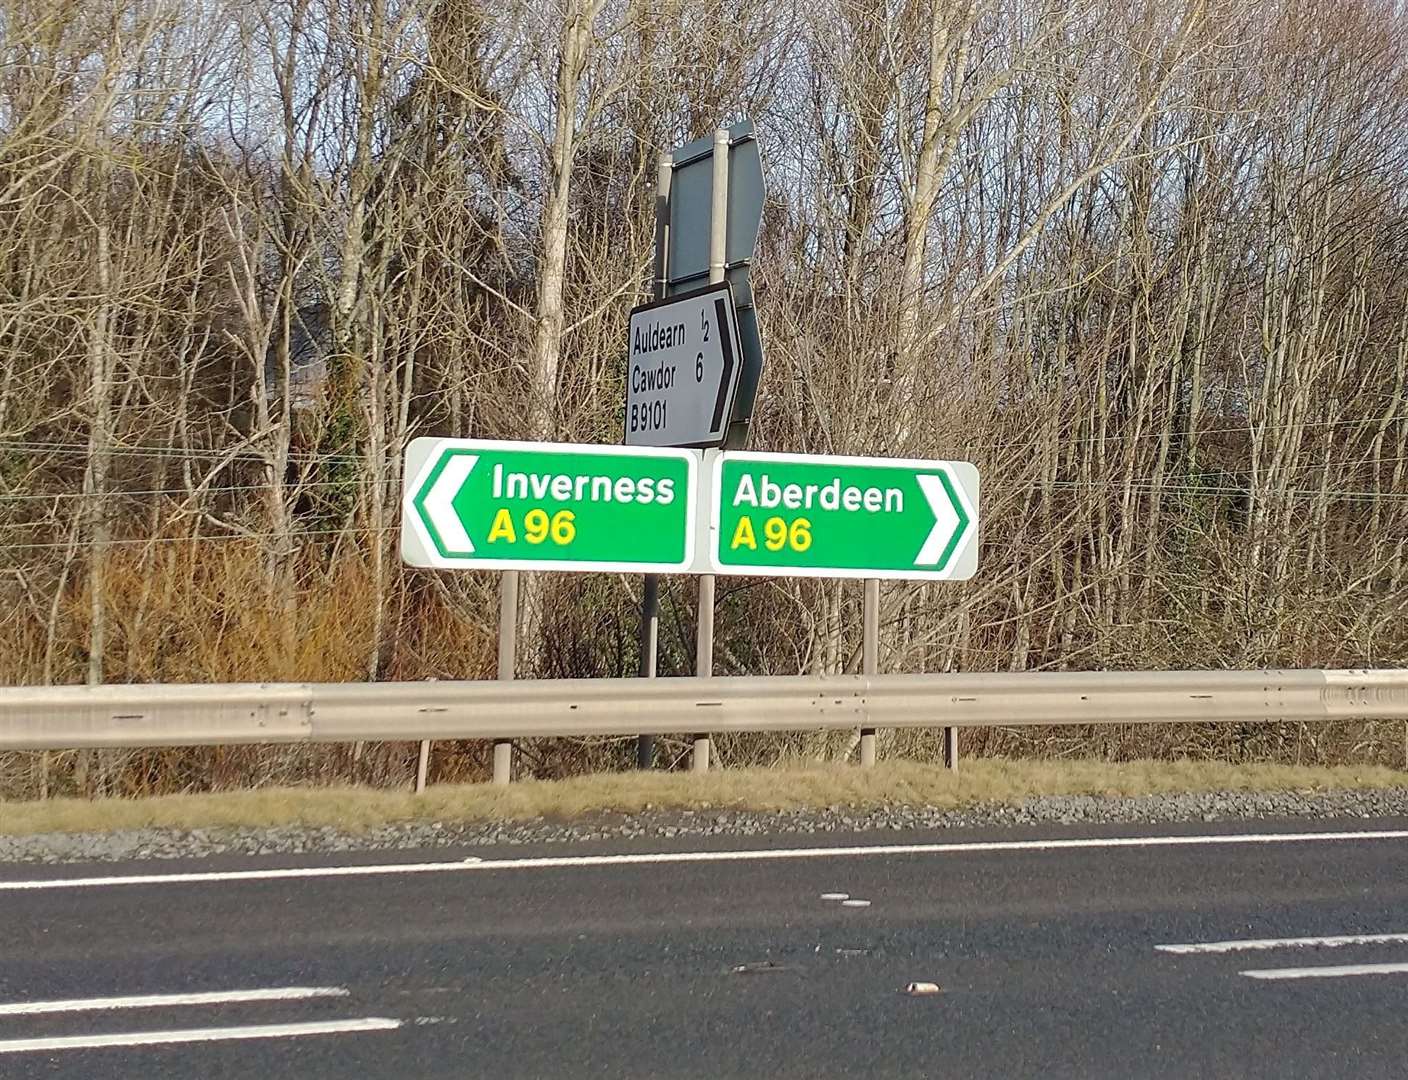 Is the A9 and A96 programmes at a crossroads or a dead end?